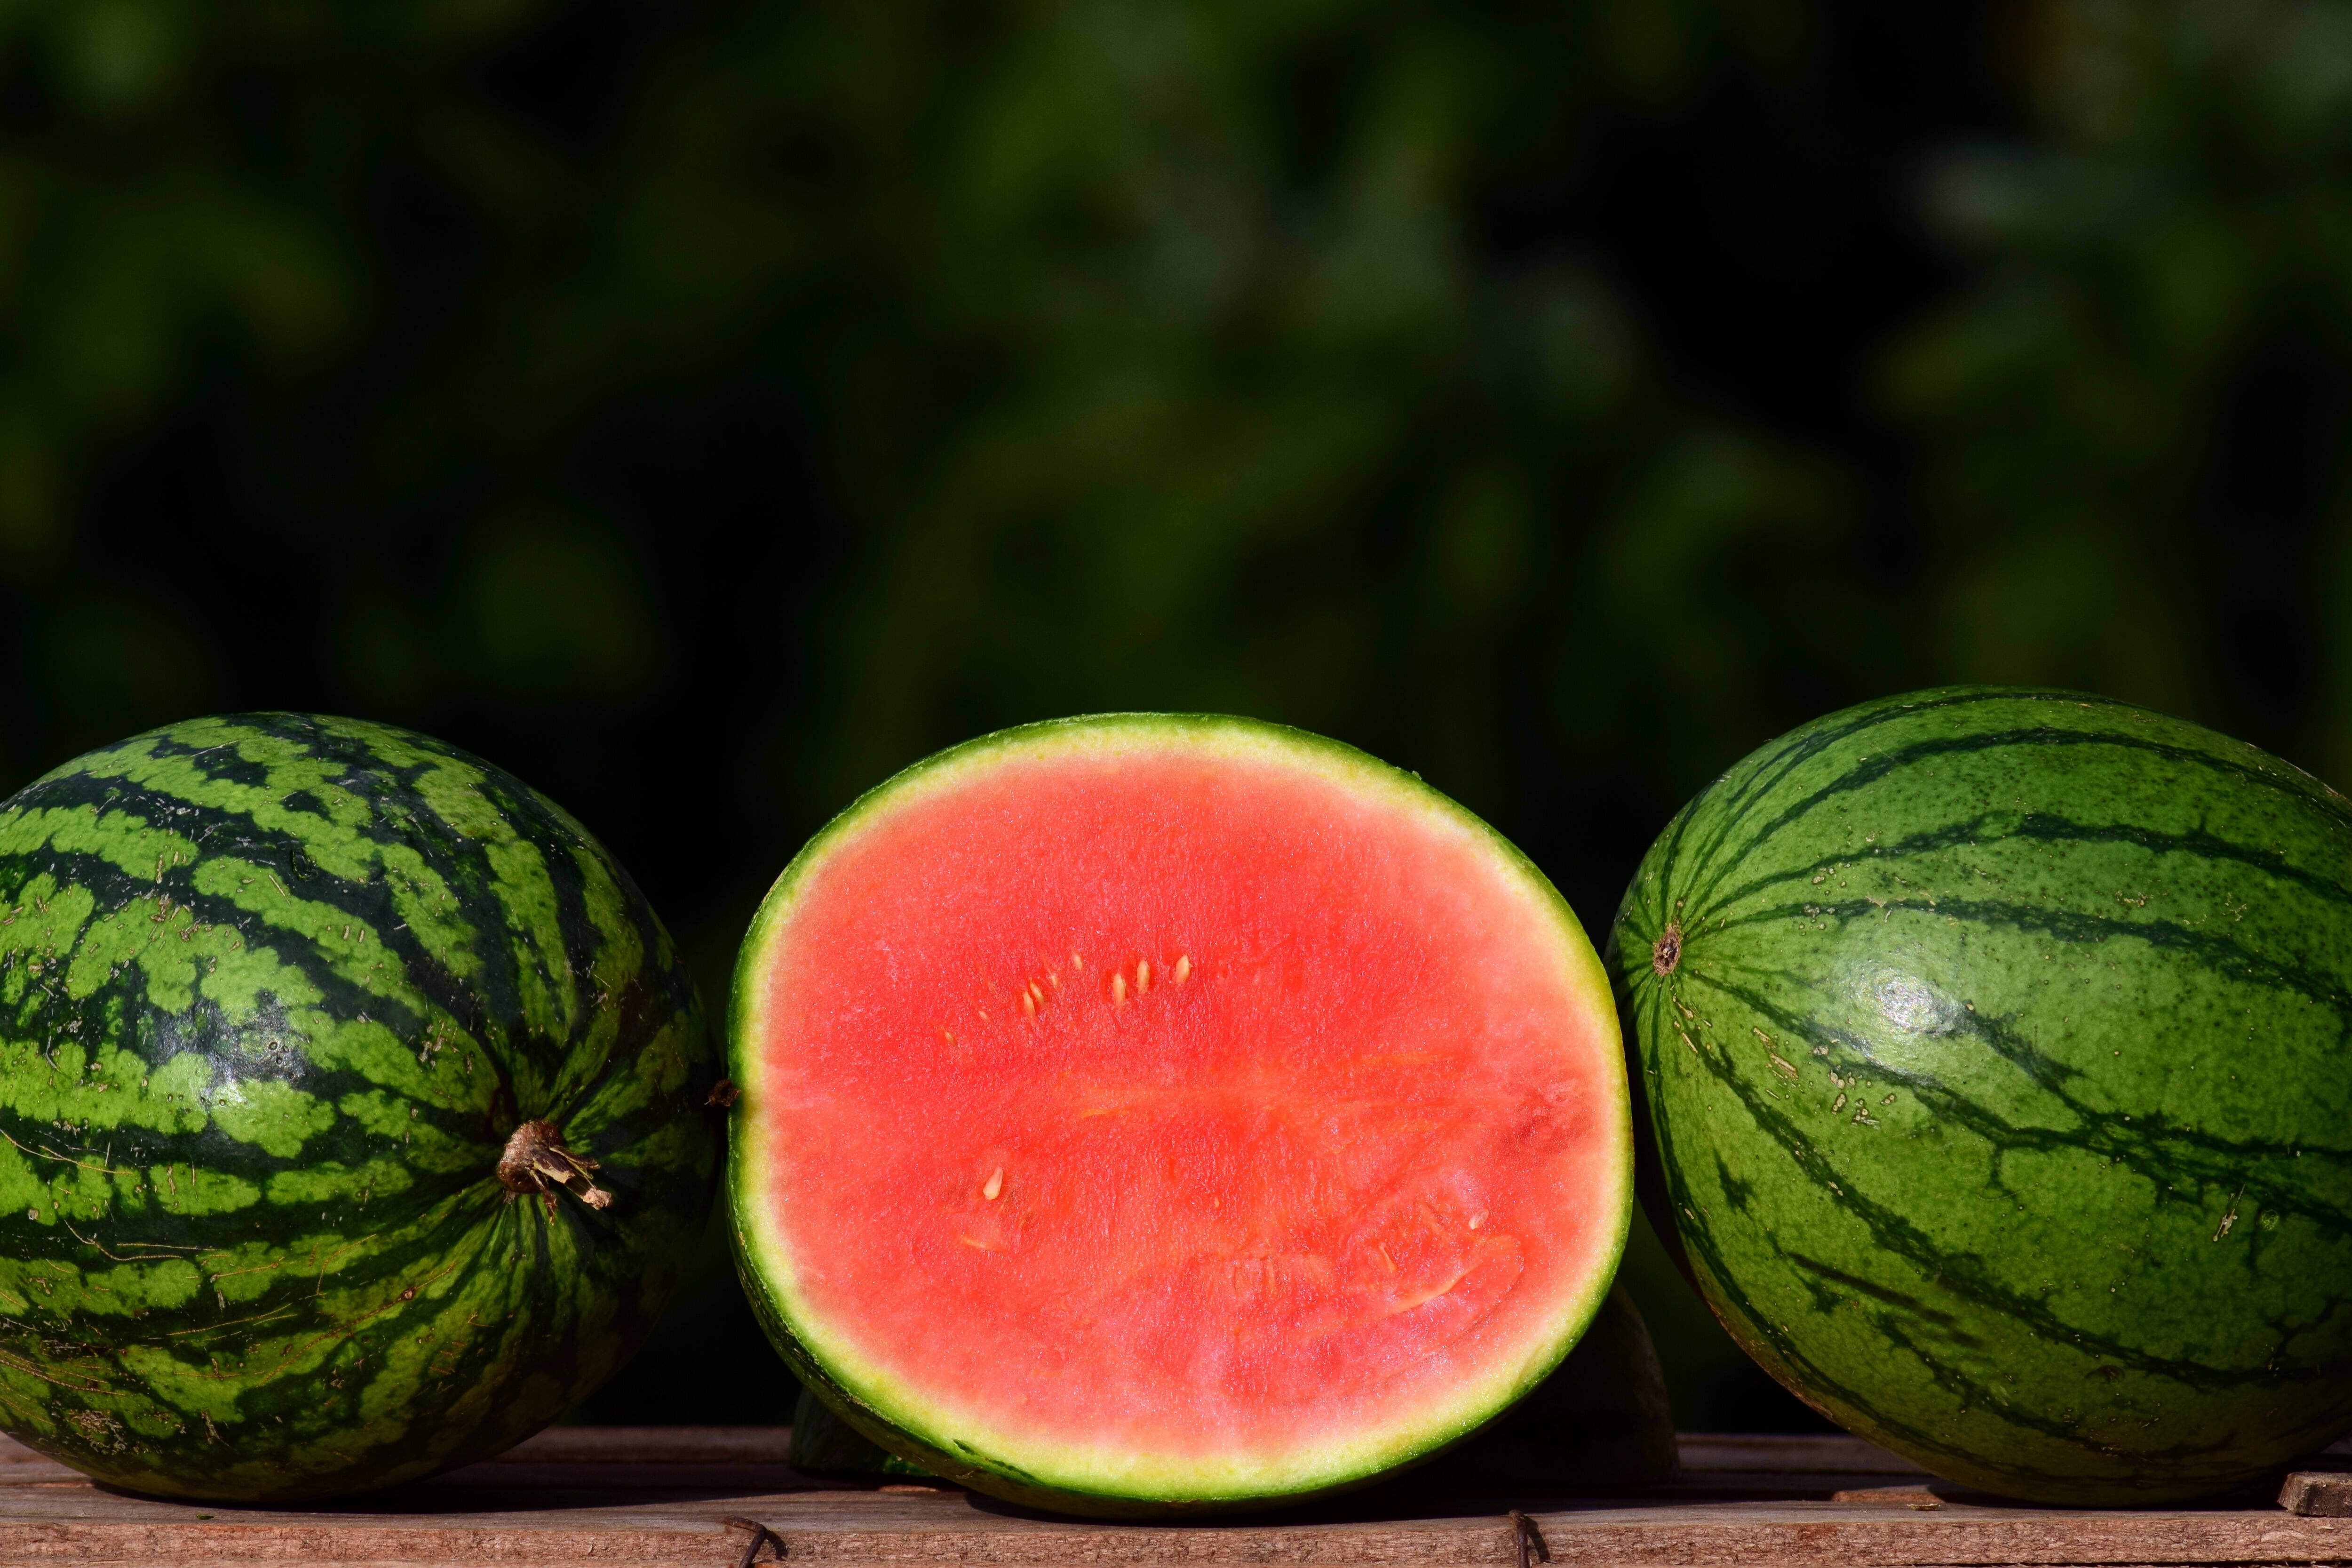 Three seedless water melons, the one in the middle is cut open.